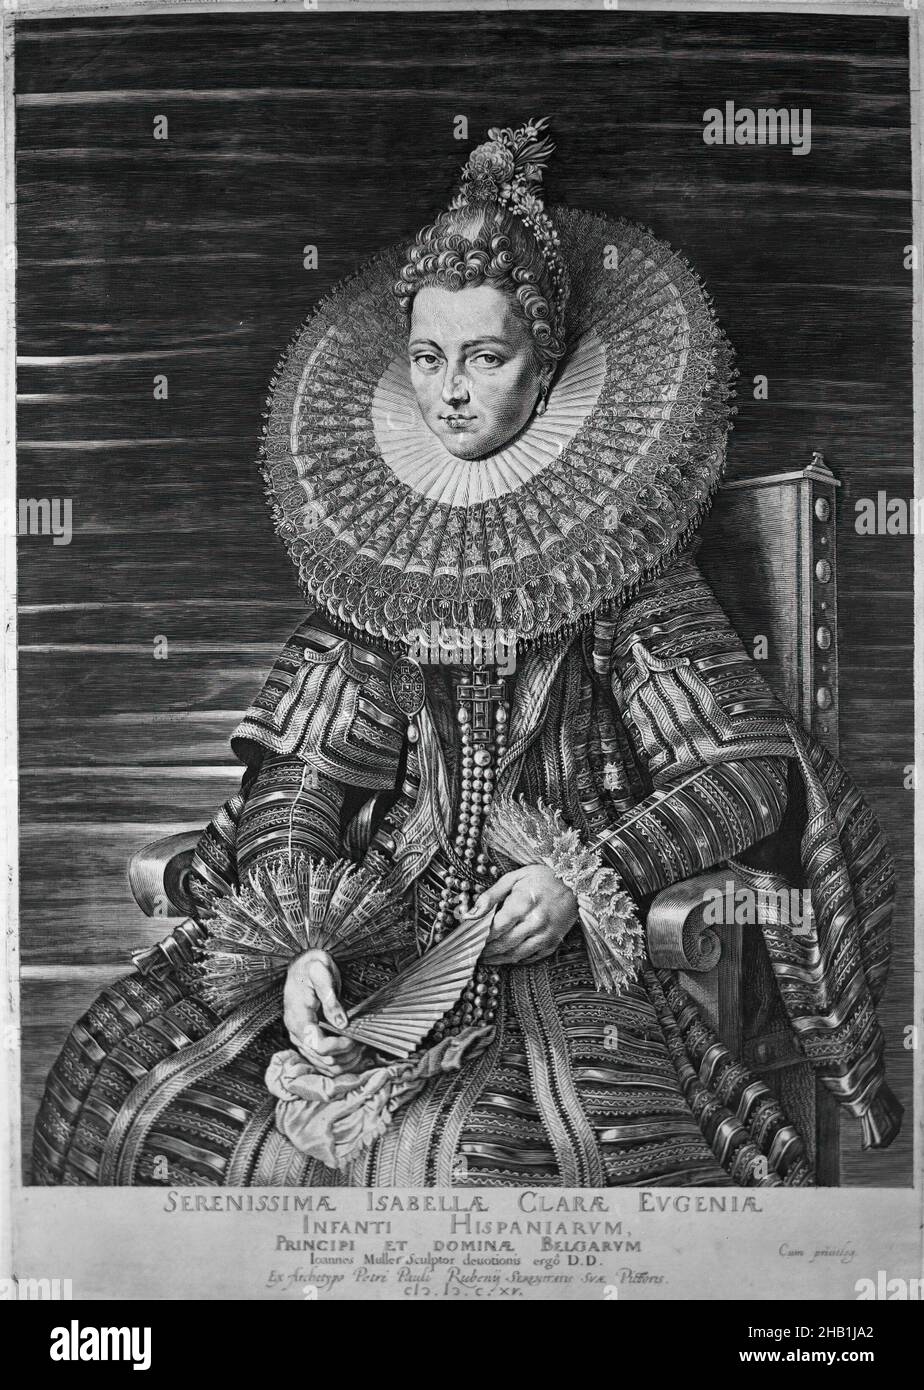 Isabella Clara Eugenia, Infanta of Spain, Jan Muller, Dutch, 1571-1628, Engraving on laid paper, 1615, 16 7/16 x 11 9/16 in., 41.8 x 29.4 cm, elite, historic person, historical painting, royal, ruler, wealth Stock Photo